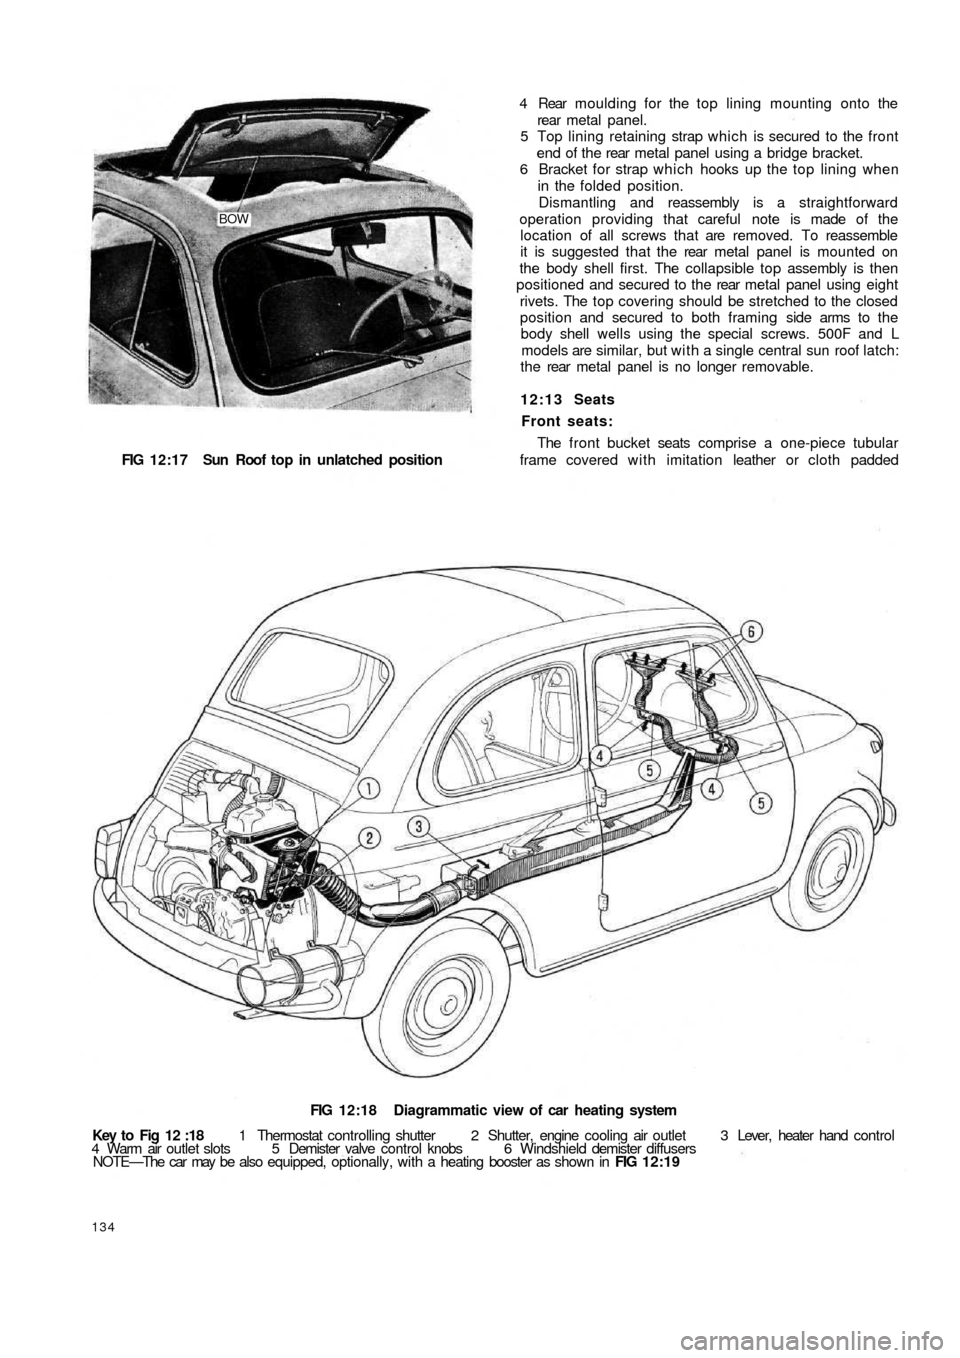 FIAT 500 1959 1.G Workshop Manual BOW
FIG 12:17  Sun Roof  top   in  unlatched position
FIG 12:18 Diagrammatic view of car heating system
Key to Fig 12 :18 1 Thermostat controlling shutter  2  Shutter,  engine  cooling air outlet  3 L